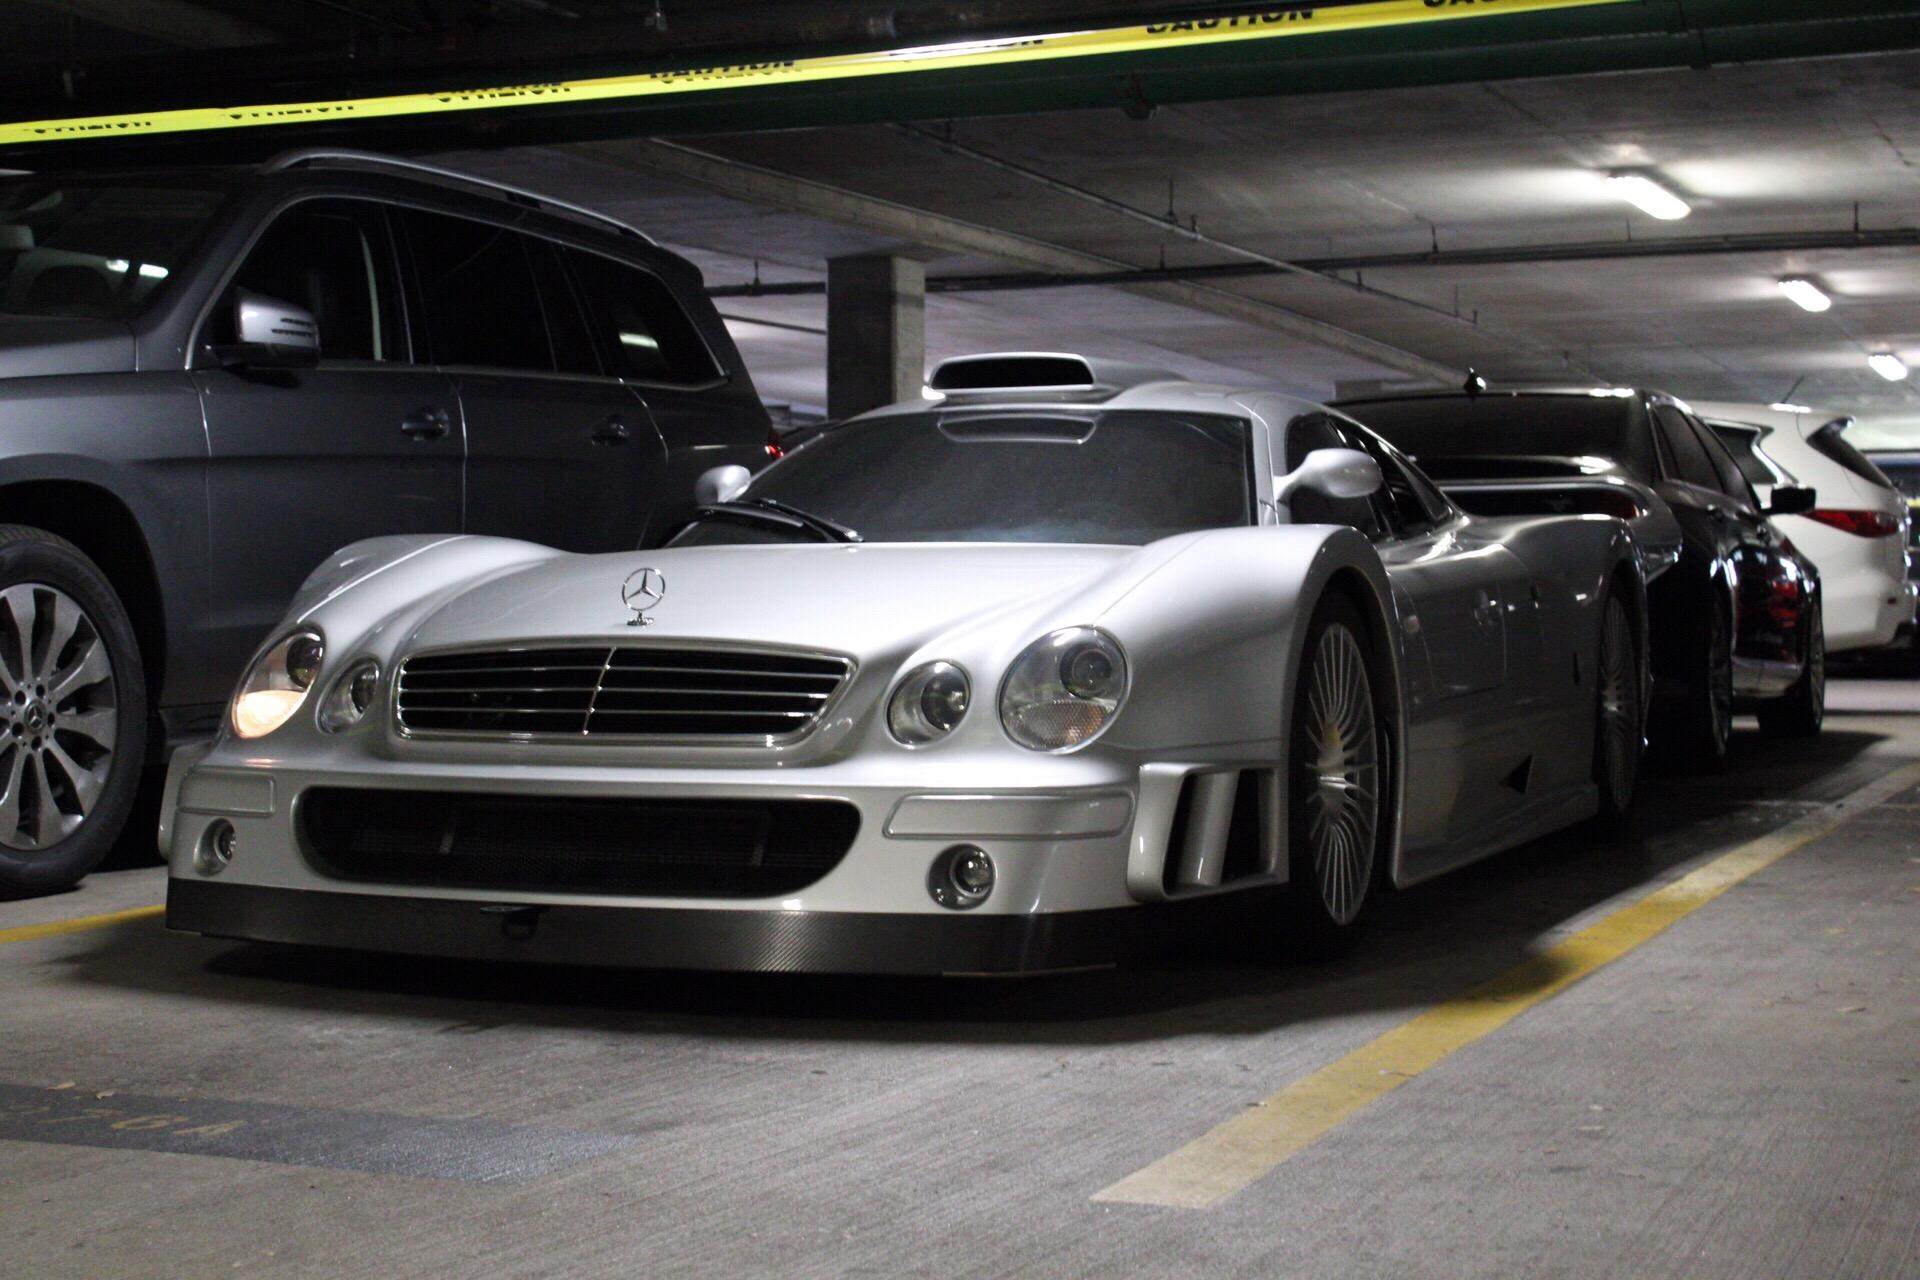 The Mercedes CLK GTR is simply a masterpiece frozen in time.